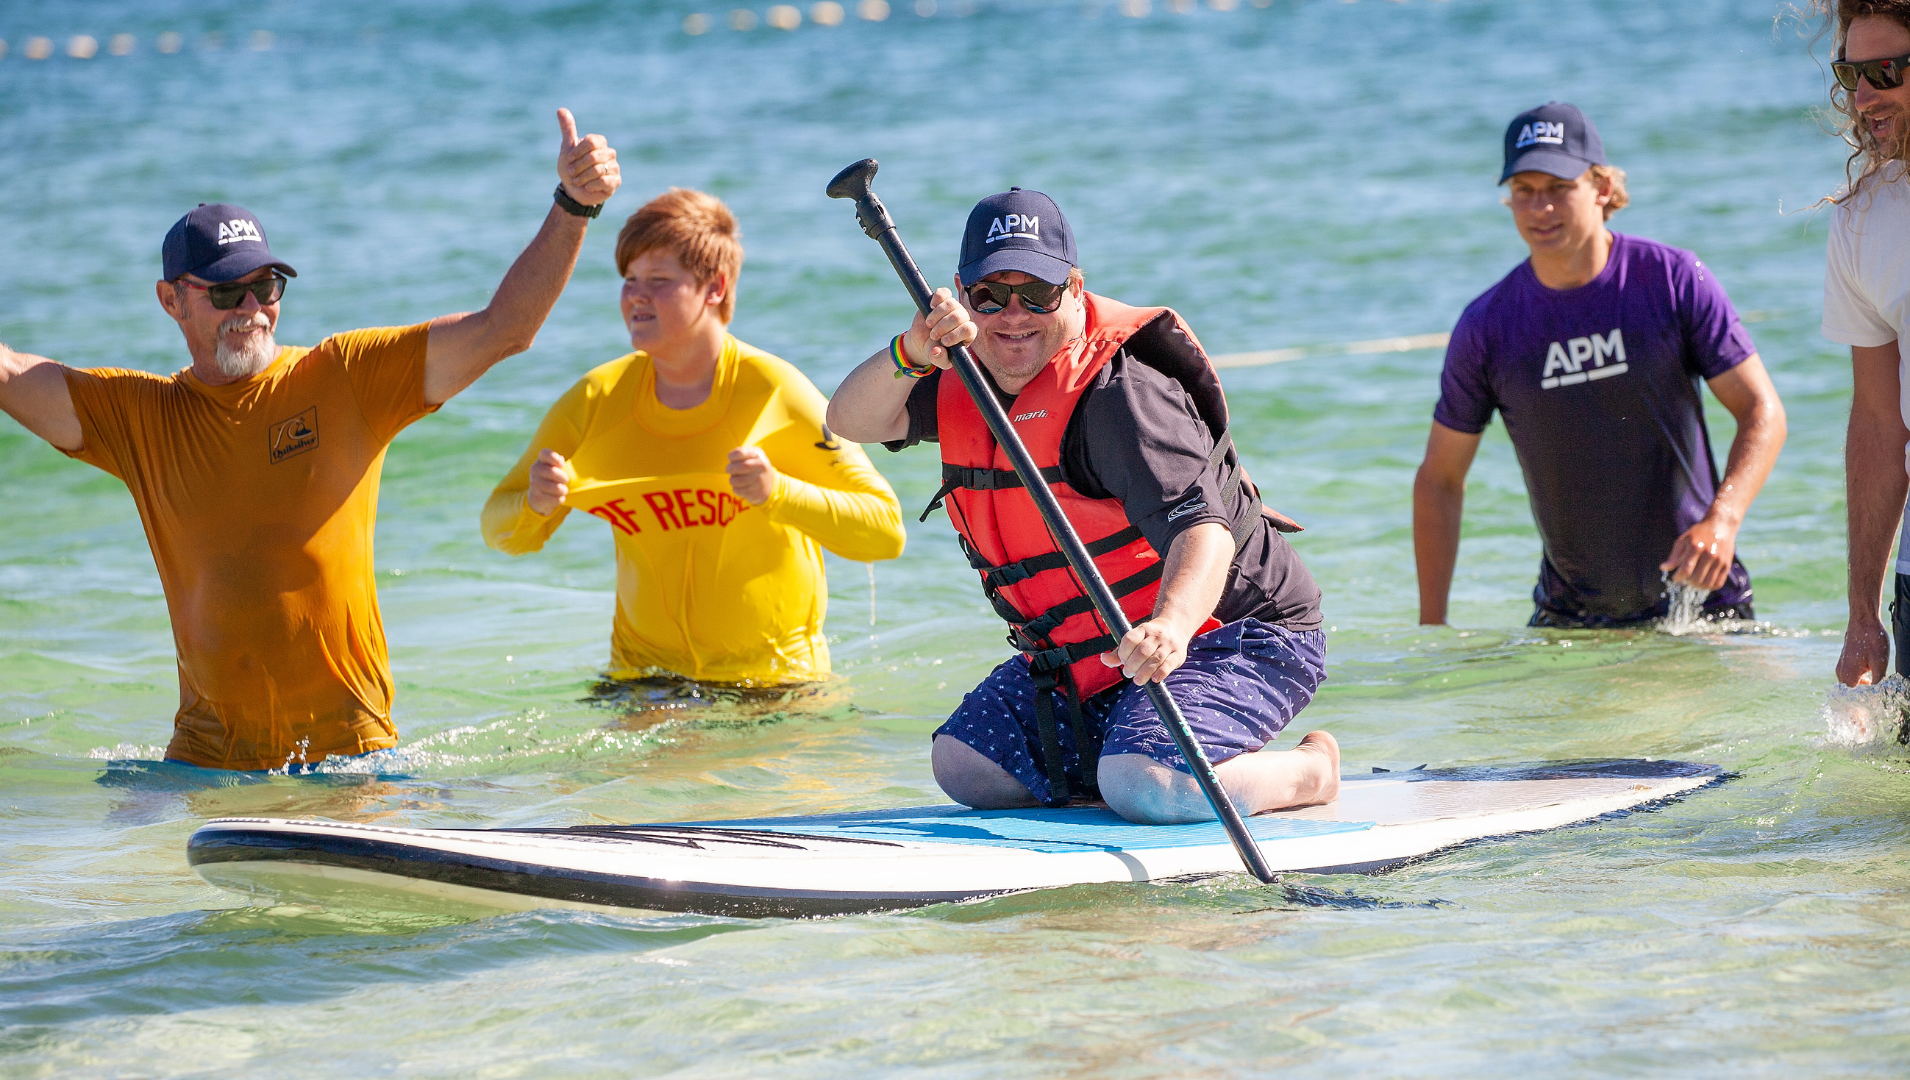 Jack kneeling on a SUP board, floating on the water, surrounded by three team members